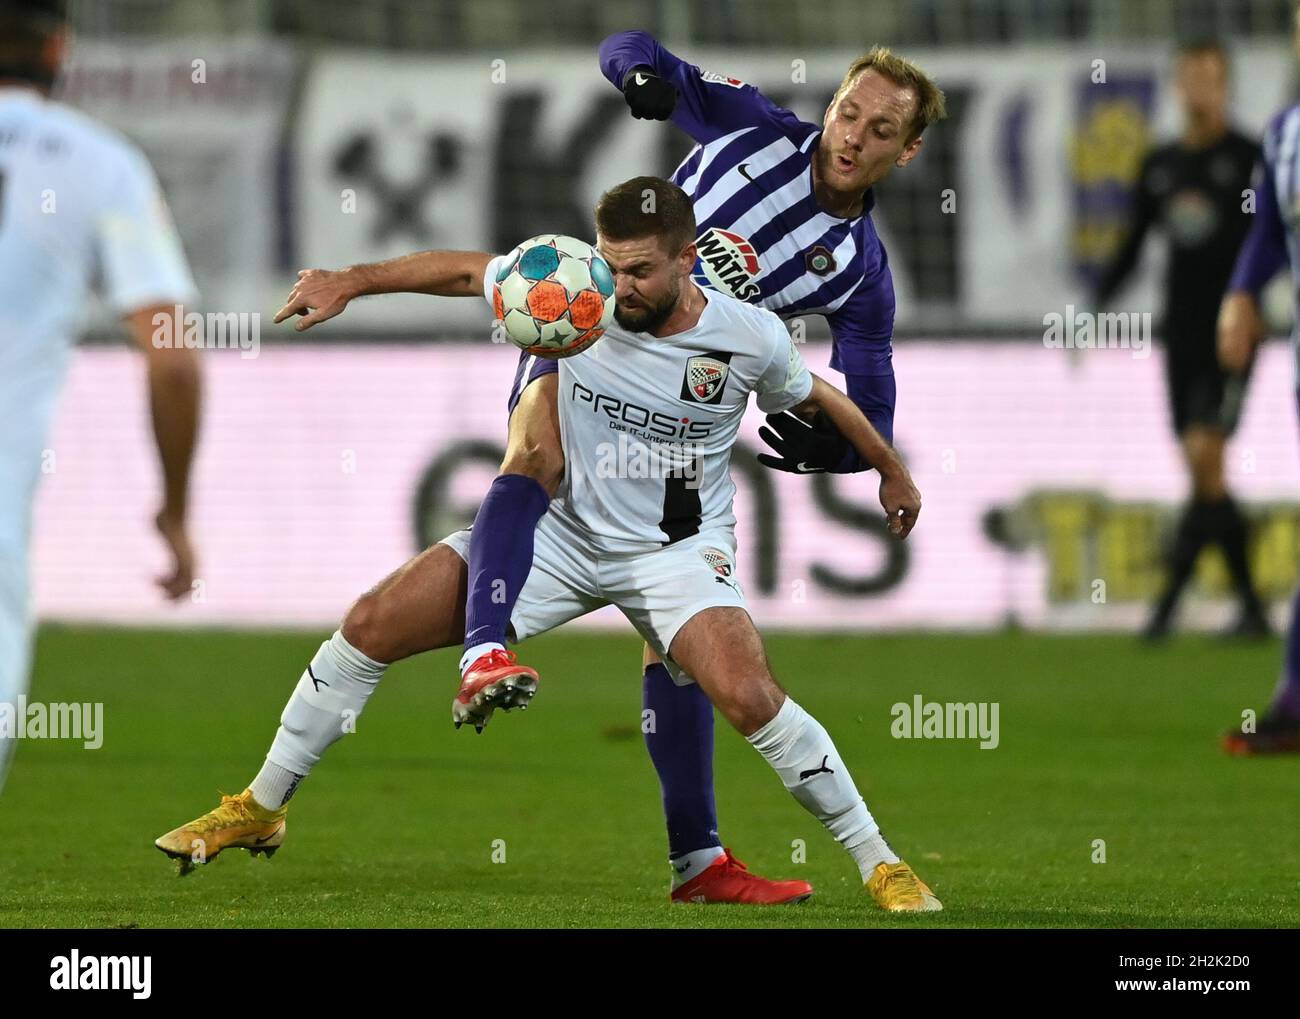 Aue, Germany. 22nd Oct, 2021. Football: 2. Bundesliga, Matchday 11, FC Erzgebirge Aue - FC Ingolstadt 04 at Erzgebirgsstadion in Aue. Aue's Ben Zolinski (r) and Ingolstadt's Marc Stendera fight for the ball. Credit: Hendrik Schmidt/dpa-Zentralbild/dpa - IMPORTANT NOTE: In accordance with the regulations of the DFL Deutsche Fußball Liga and/or the DFB Deutscher Fußball-Bund, it is prohibited to use or have used photographs taken in the stadium and/or of the match in the form of sequence pictures and/or video-like photo series./dpa/Alamy Live News Stock Photo